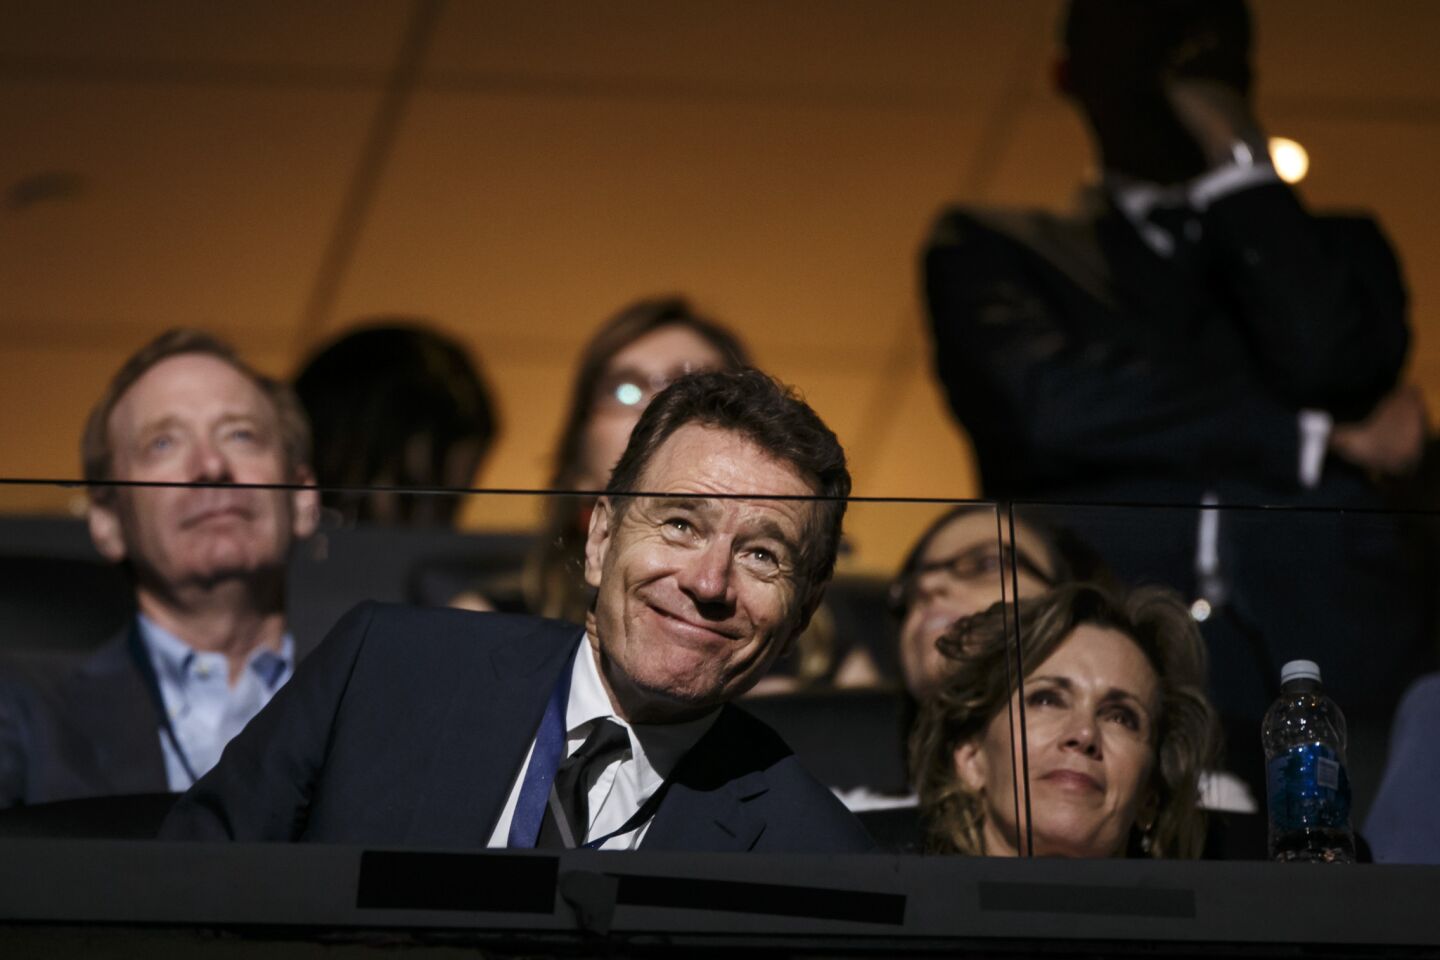 Actor Bryan Cranston watching the 2016 Democratic National Convention in Philadelphia.